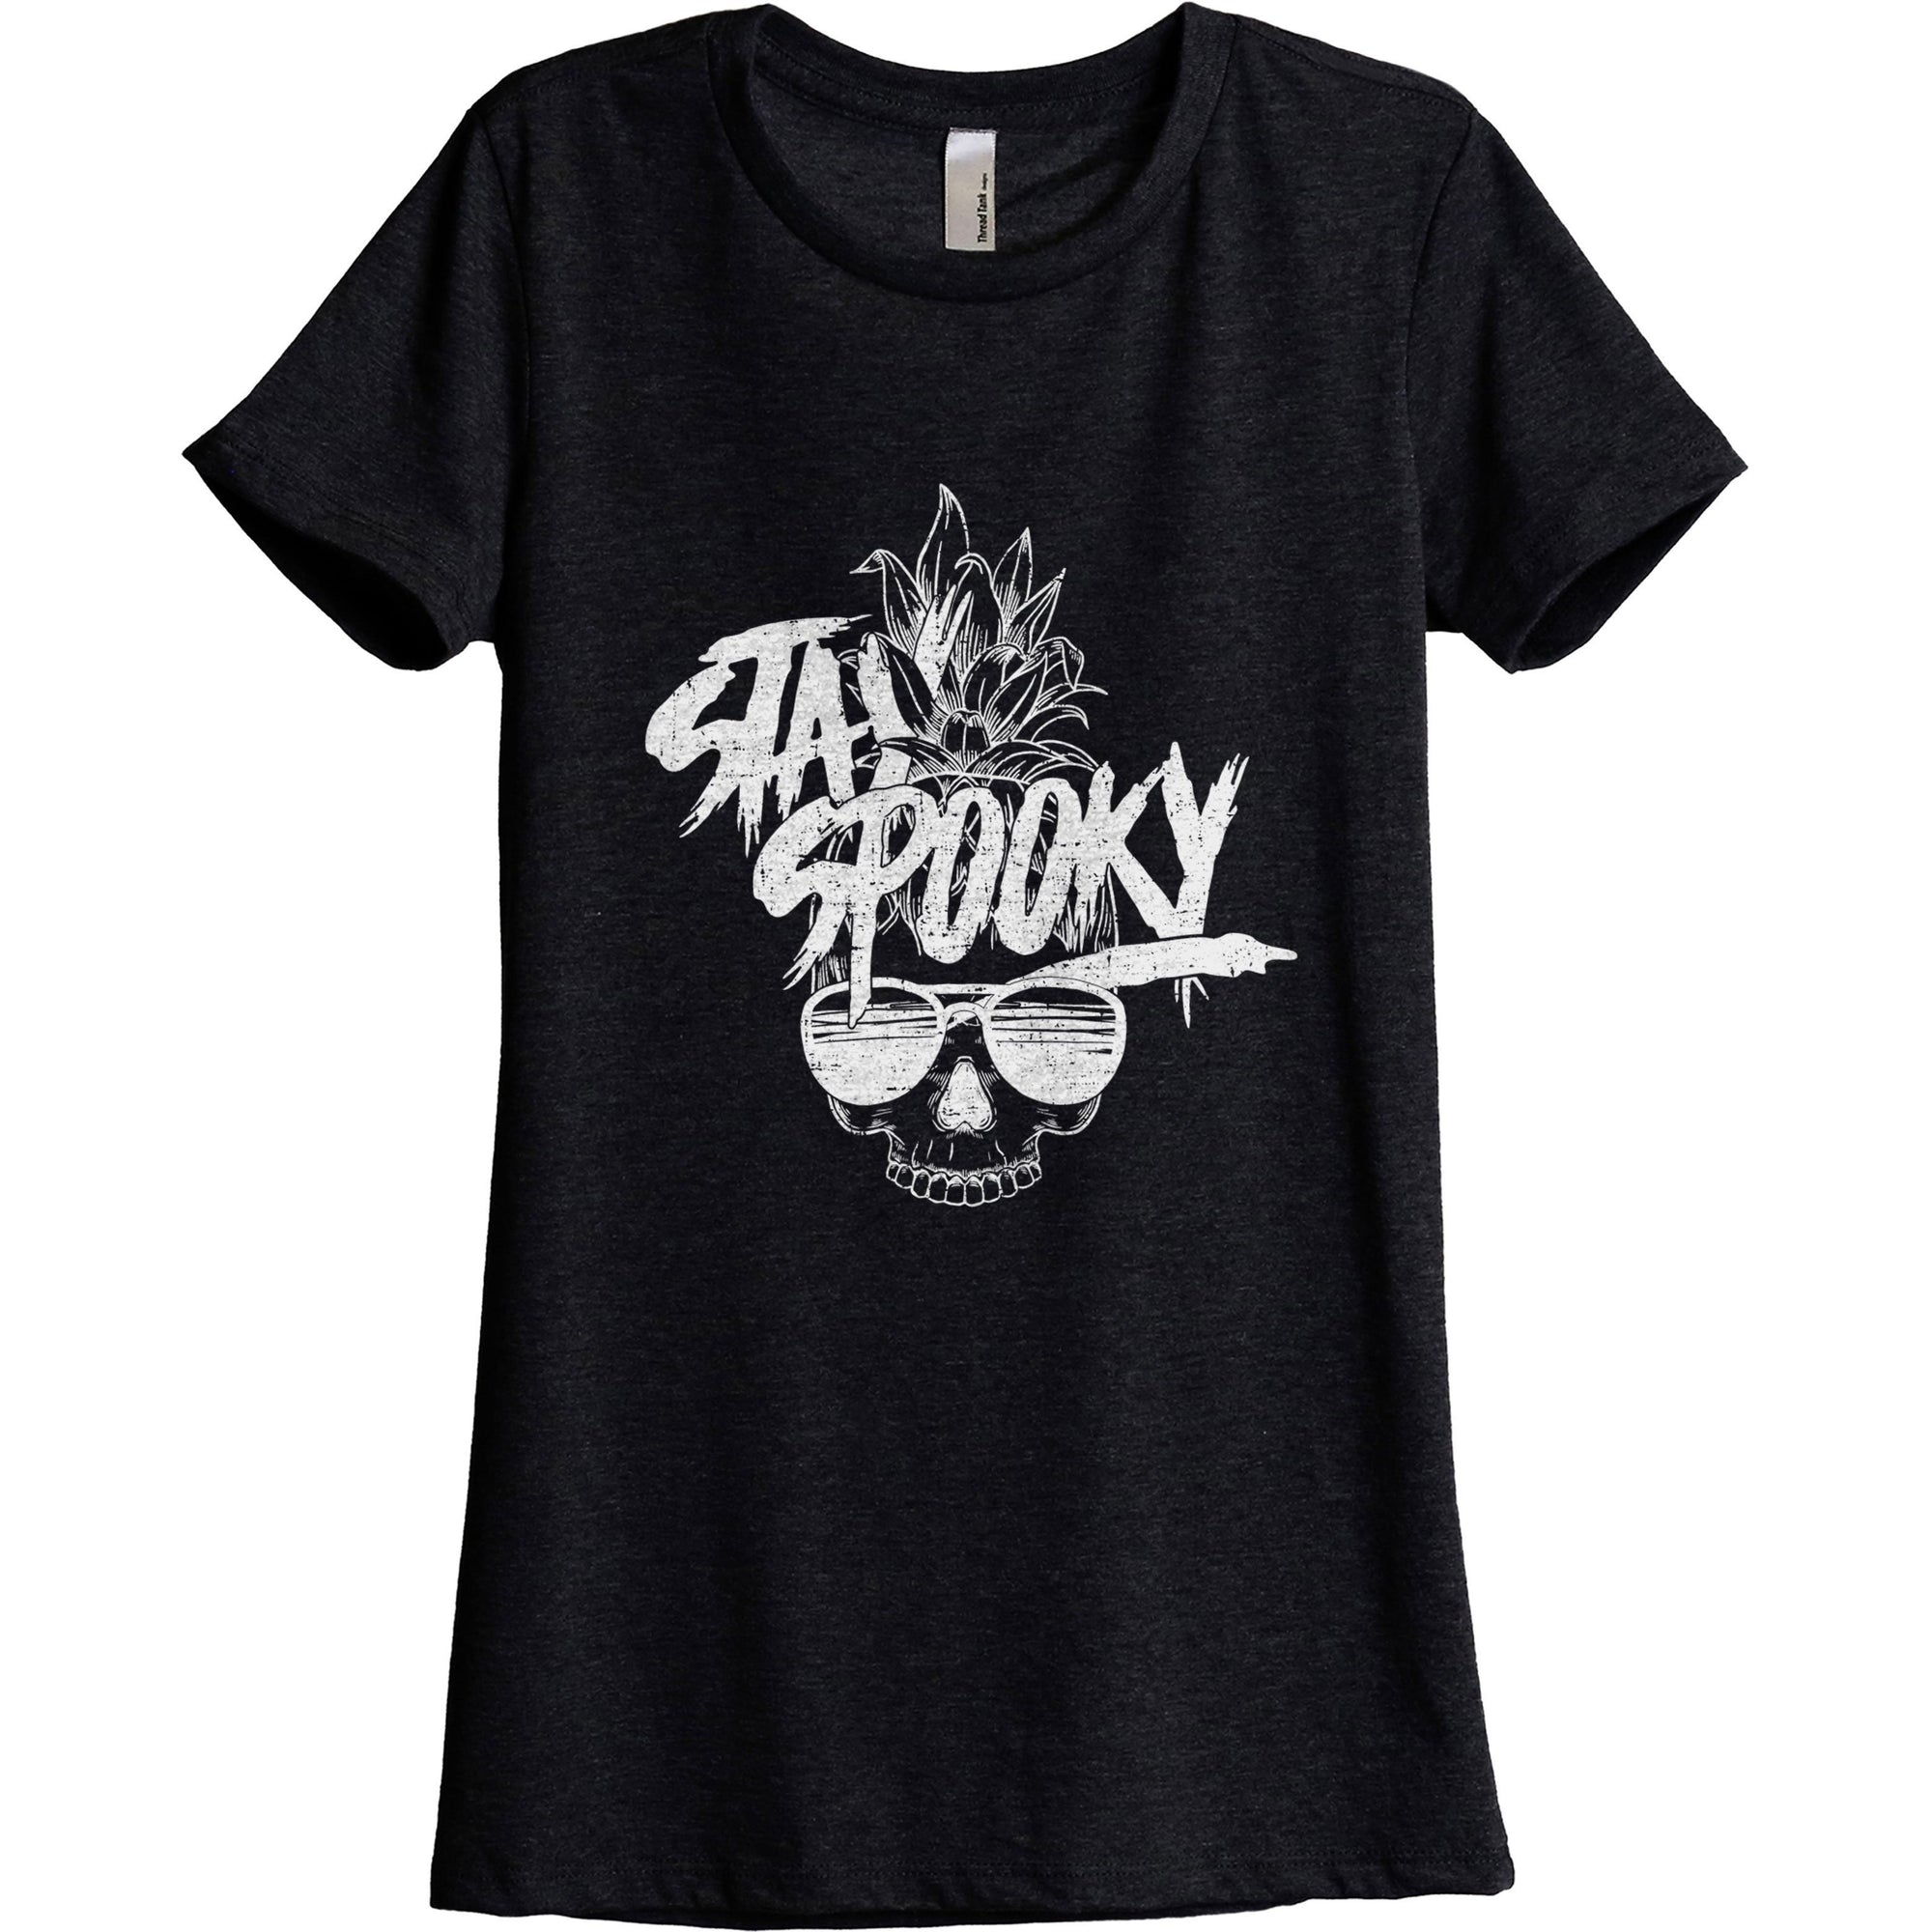 Stay Spooky - thread tank | Stories you can wear.